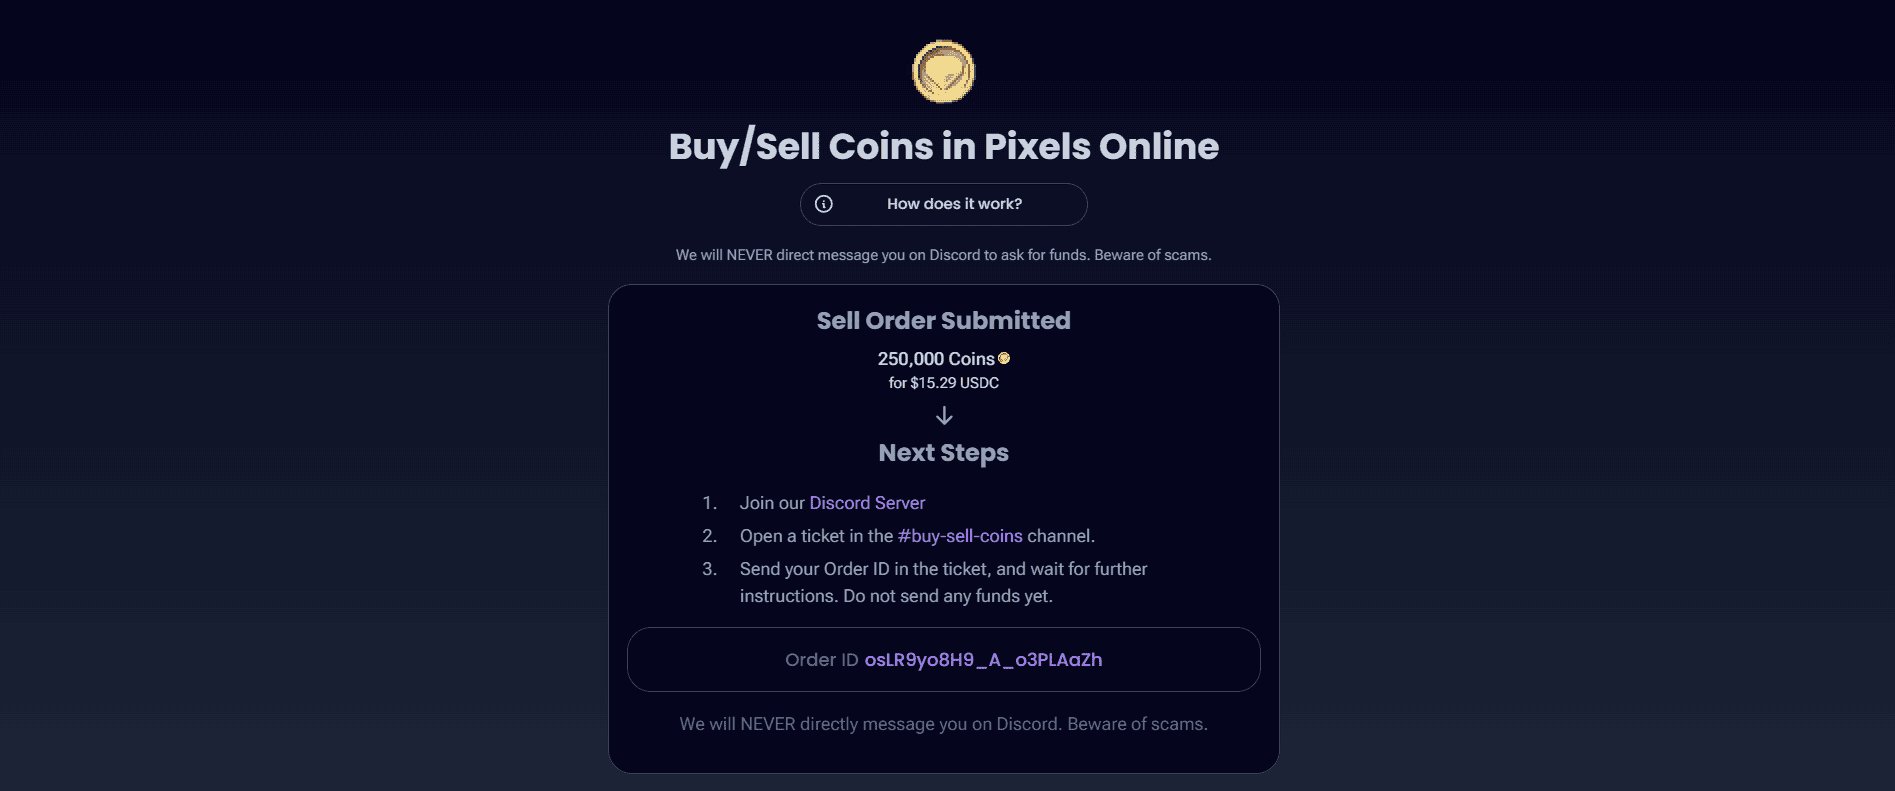 Guide to Selling/Buying Gold Coins in Pixels: A Step-by-Step Process